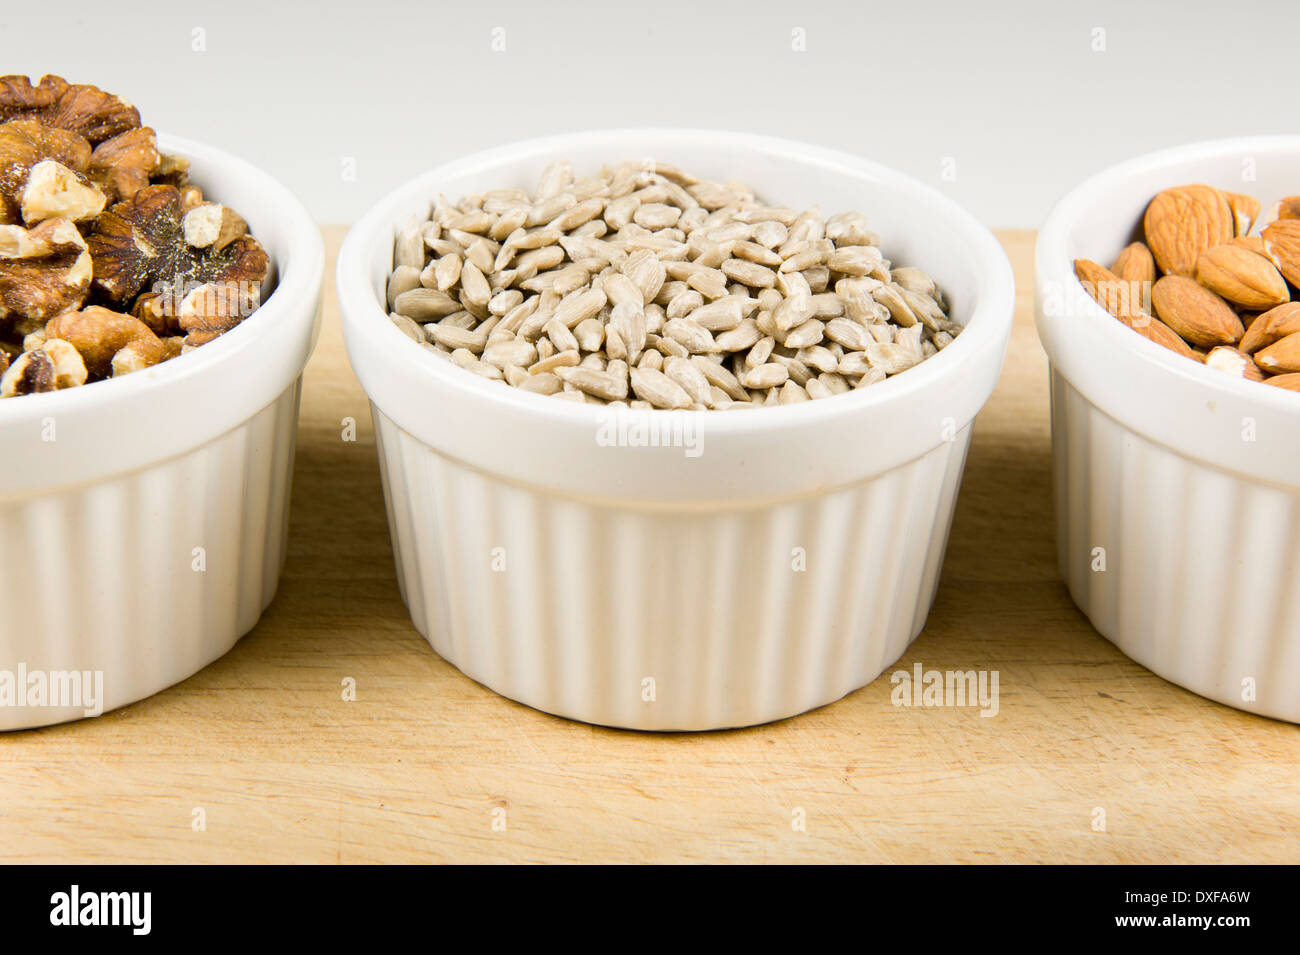 Close up photograph of three white ramekin bowls individually filled with walnuts, sunflower seed, and almonds. Stock Photo